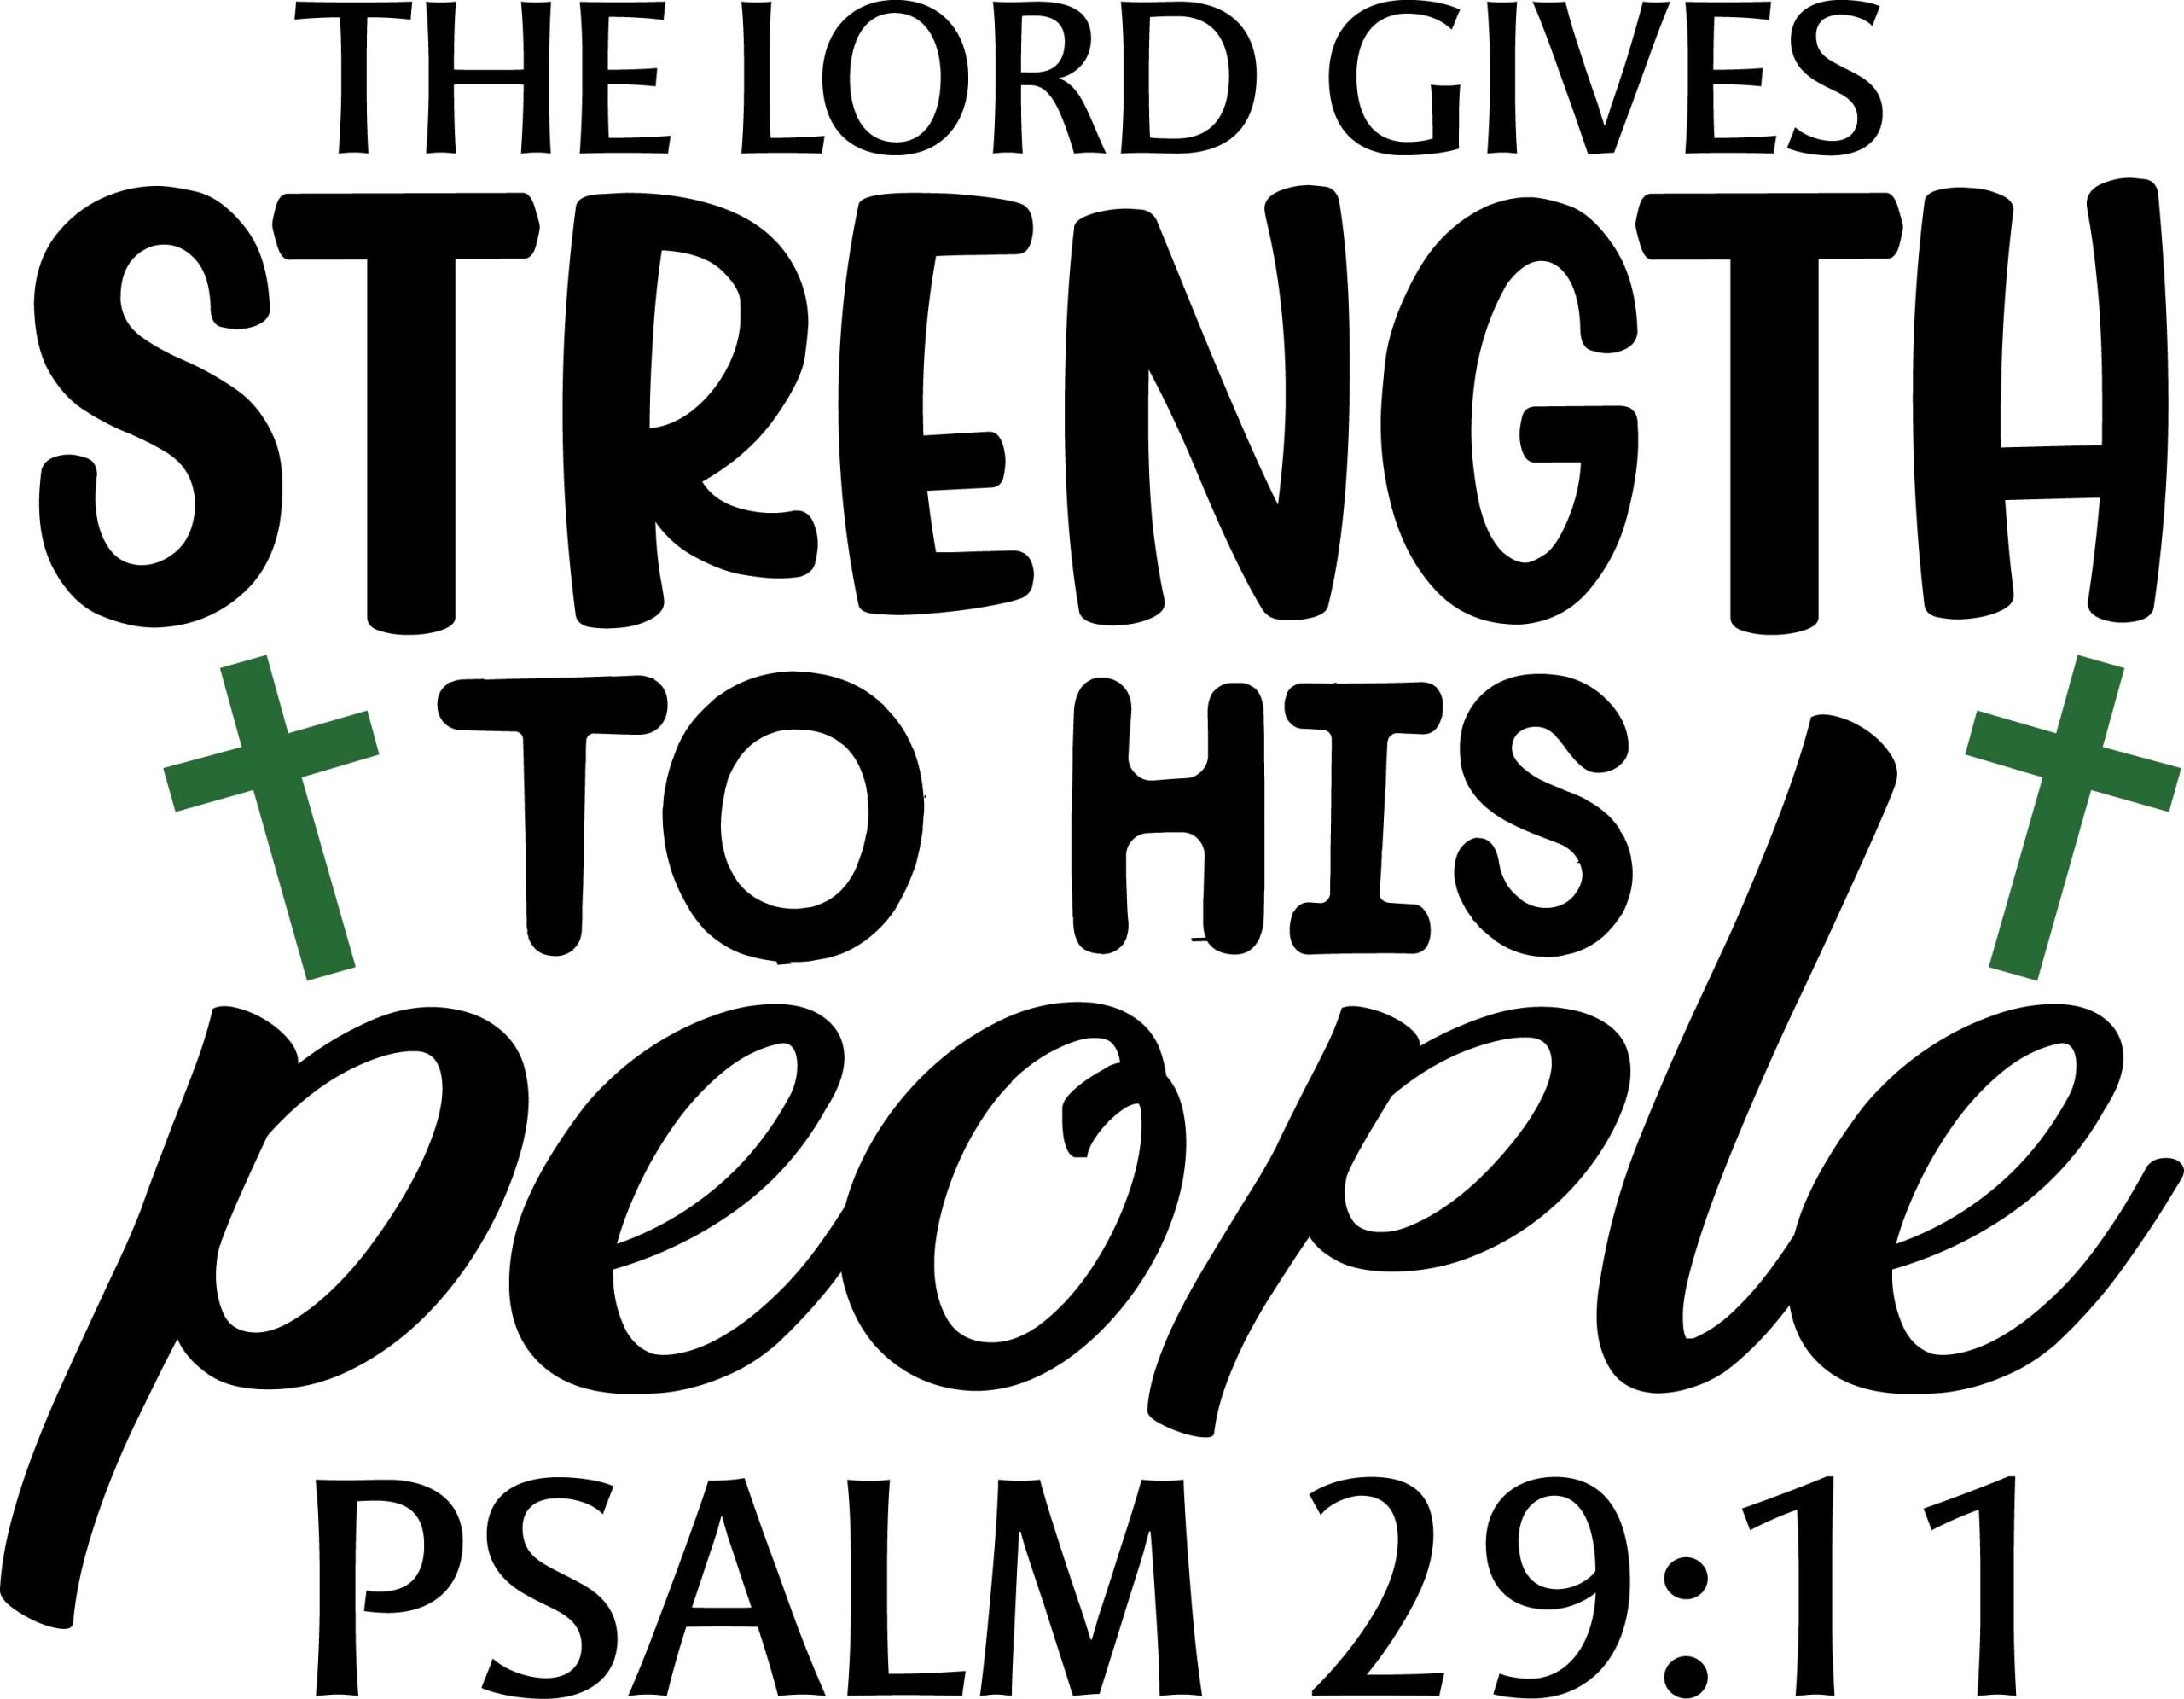 The lord gives strength to his people psalm 29:11, bible verses, scripture verses, svg files, passages, sayings, cricut designs, silhouette, embroidery, bundle, free cut files, design space, vector